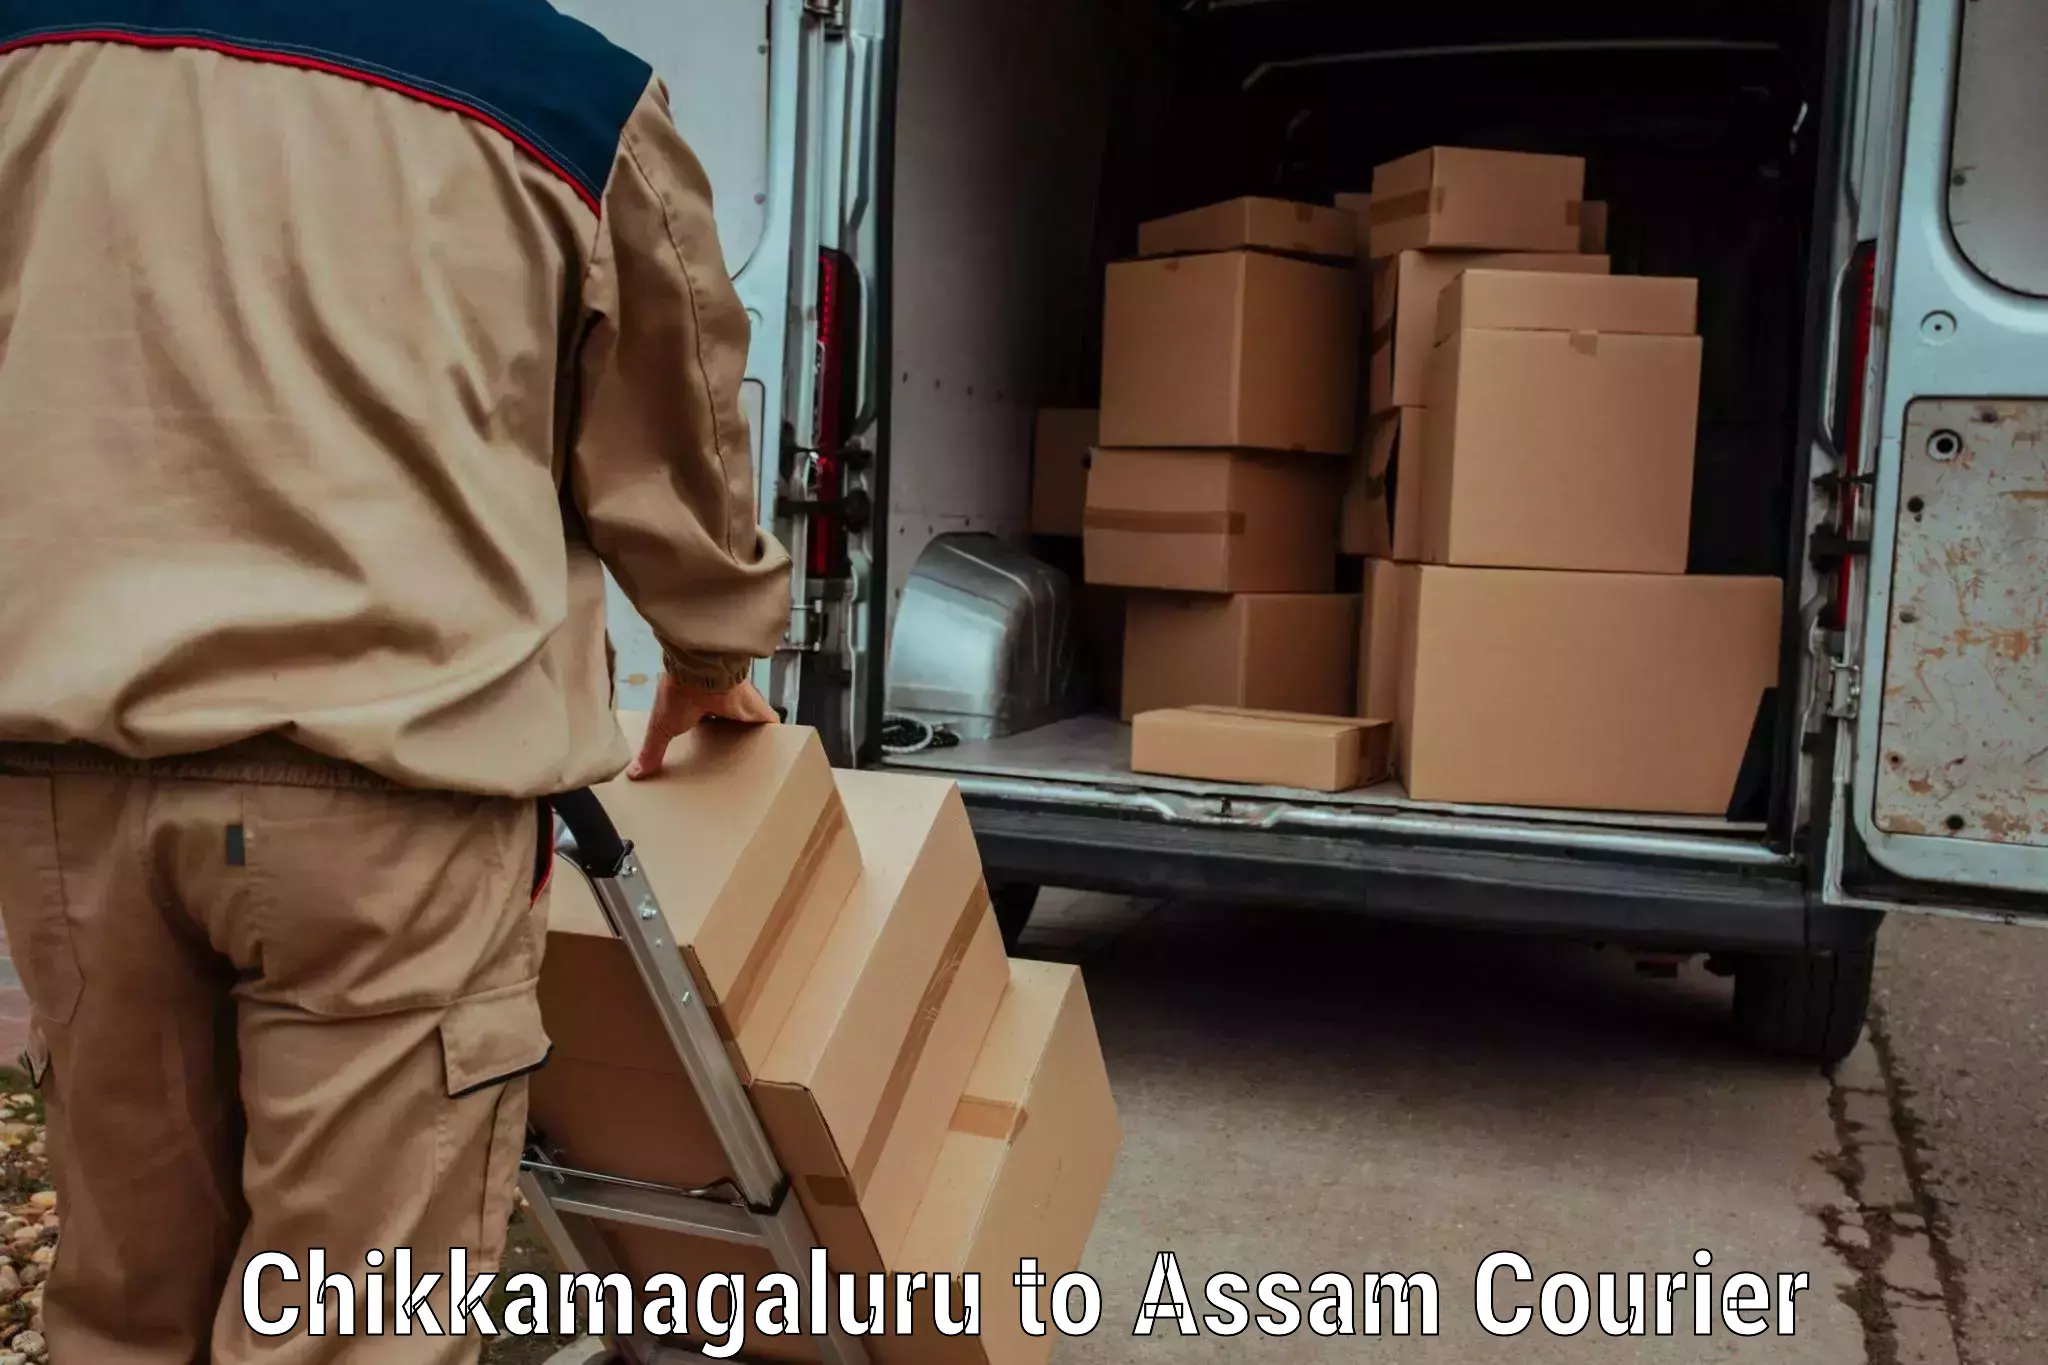 Easy access courier services Chikkamagaluru to Nagaon